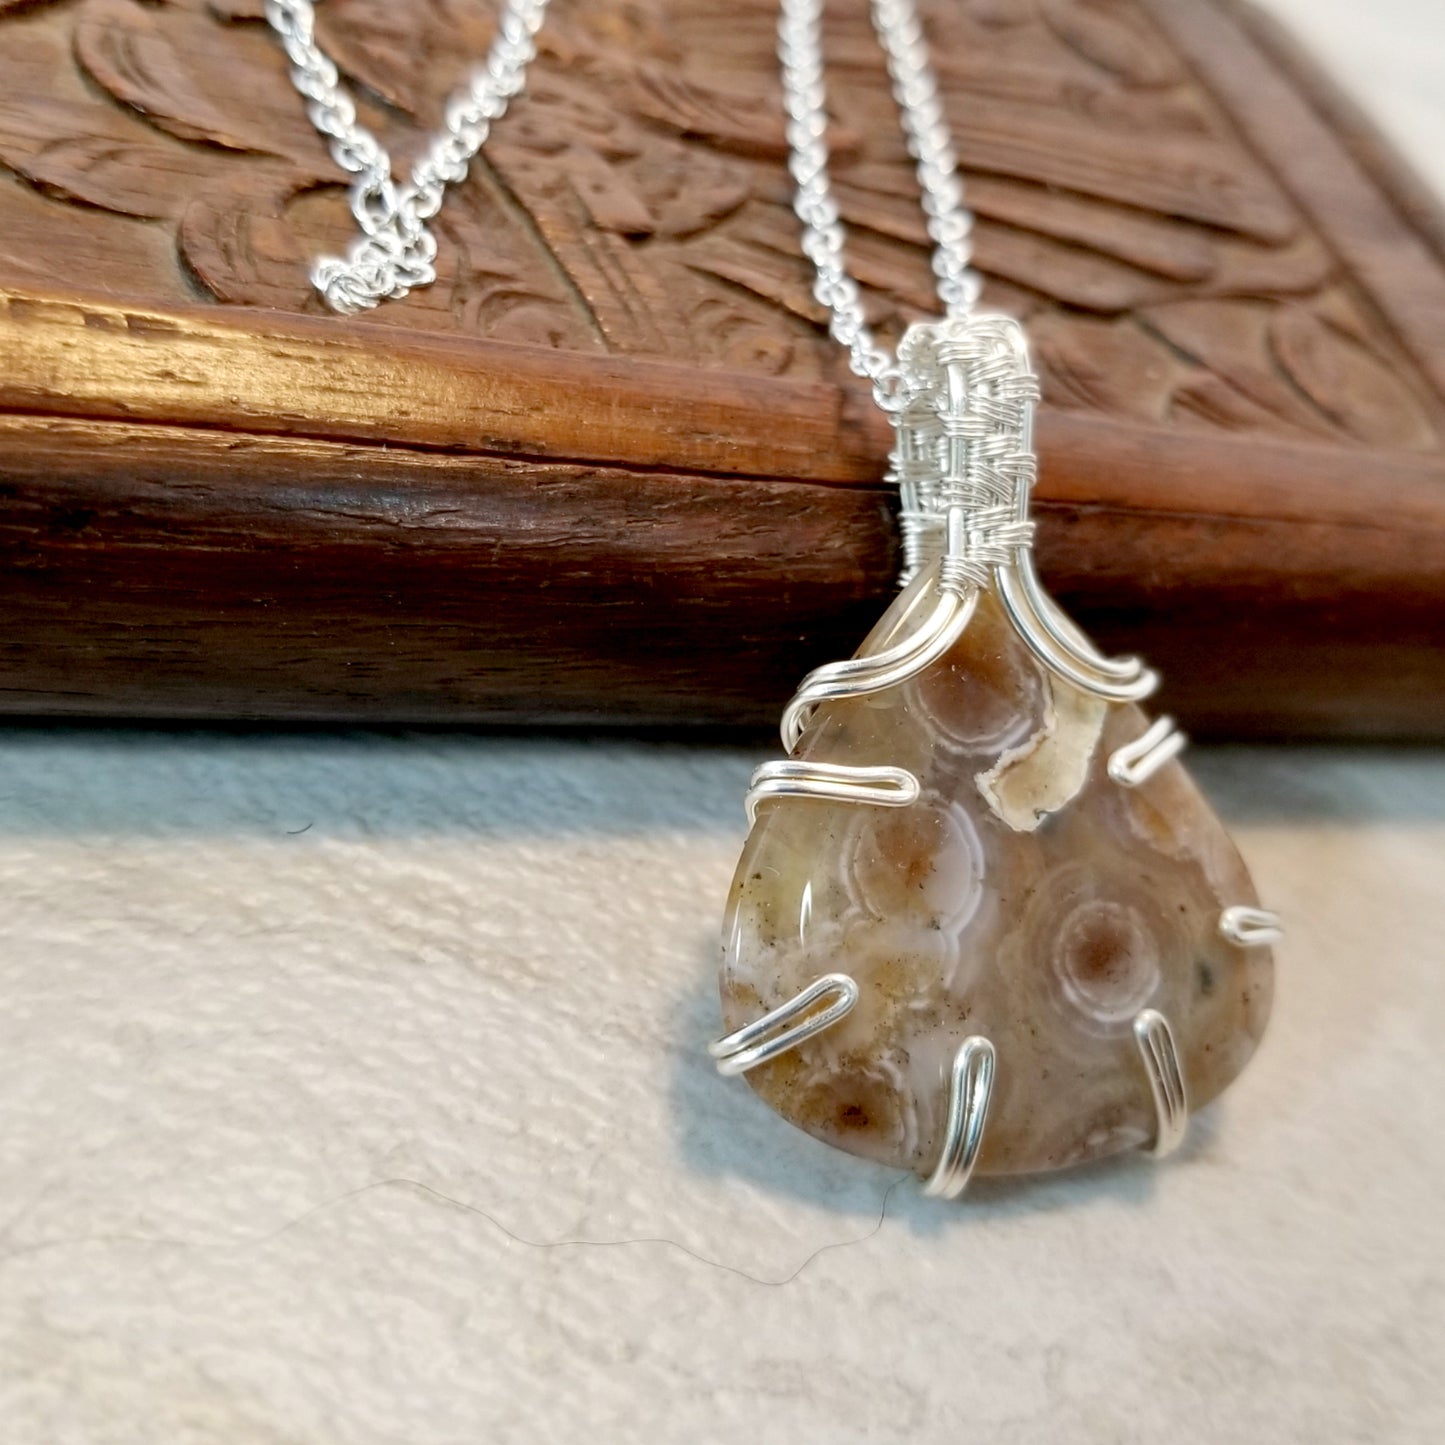 Agate Business Casual Jewelry, Wire Wrapped Necklace, Jewelry Gift for Her